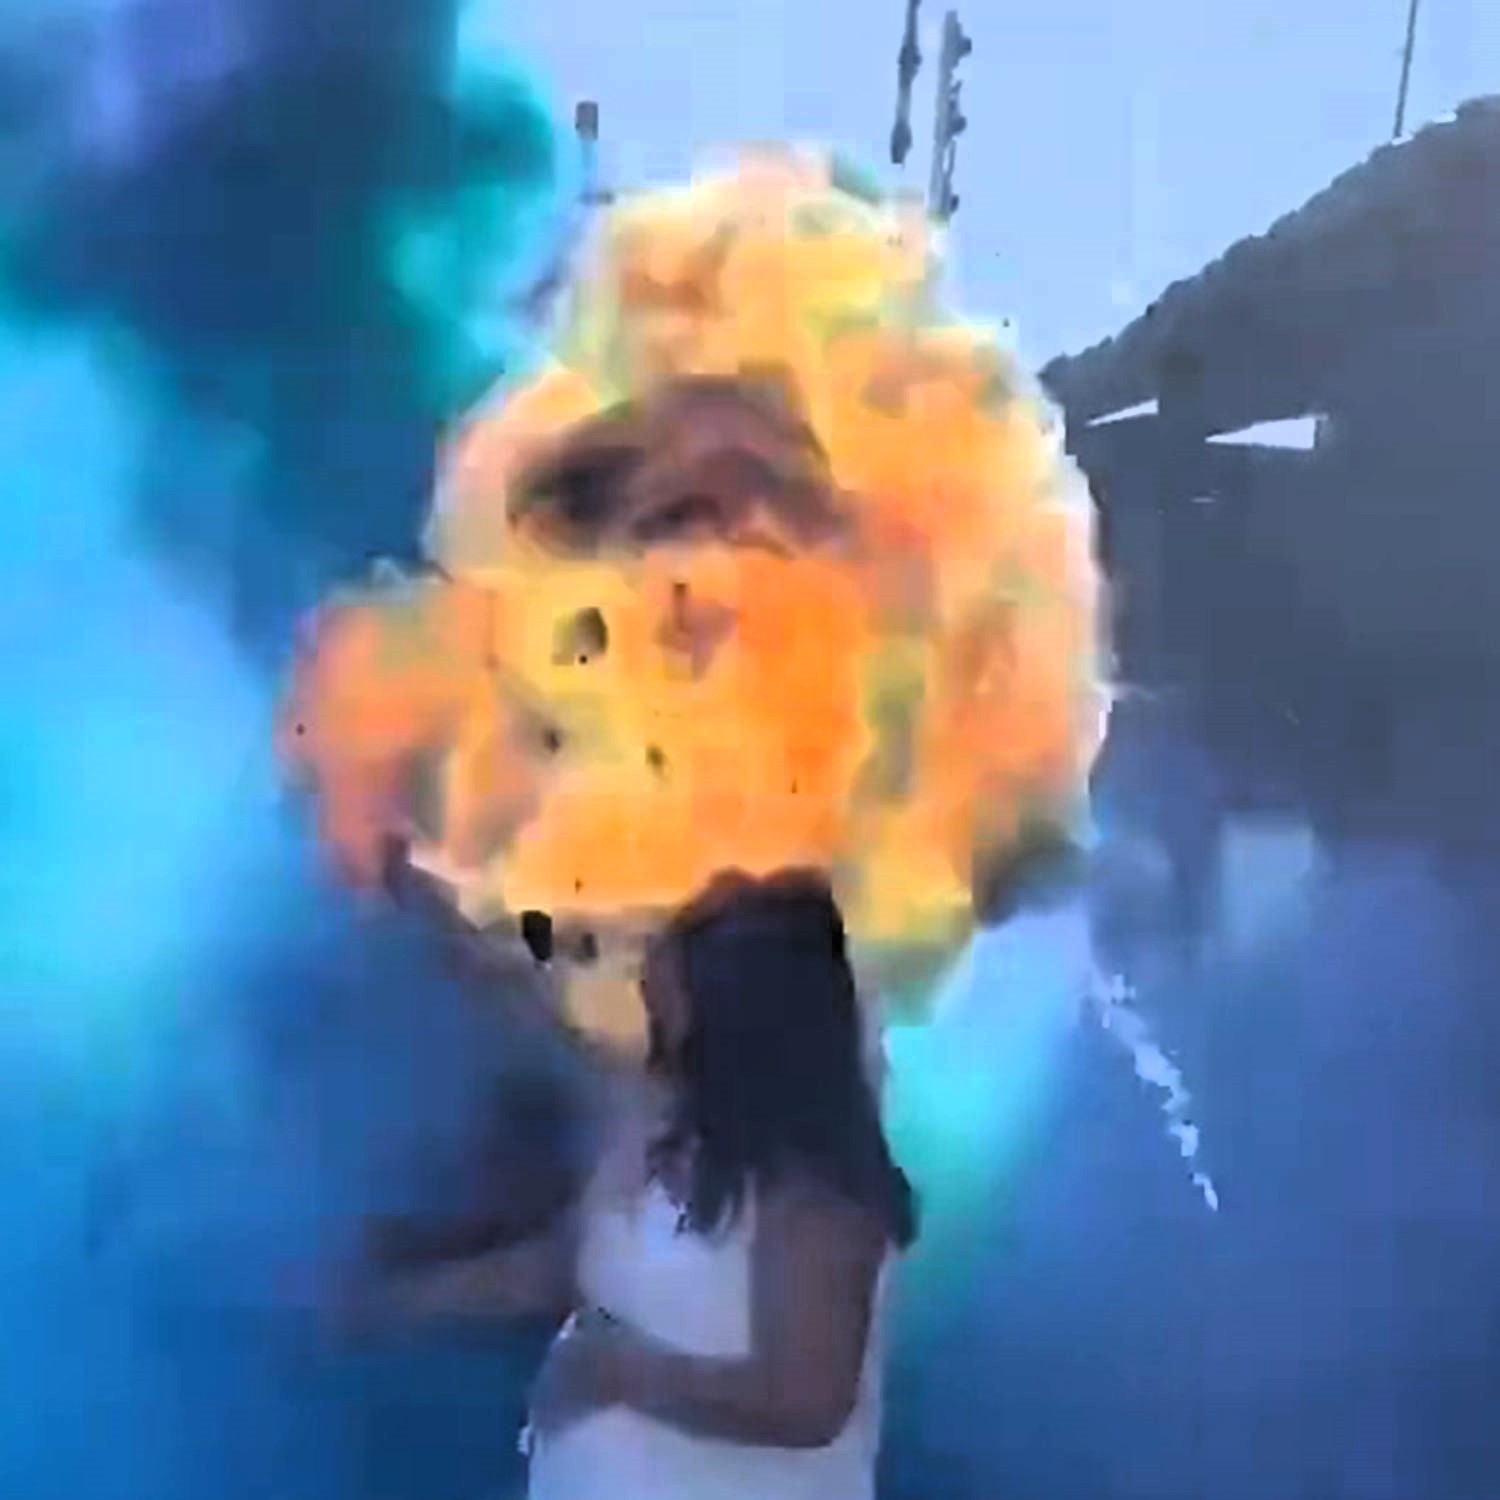 A father narrowly escaped serious injury when a smoke bomb exploded during his gender reveal party in Linhares, Brazil. Footage shows Carlos Henrique engulfed in blue smoke before a fireball ignites, causing minor burns.